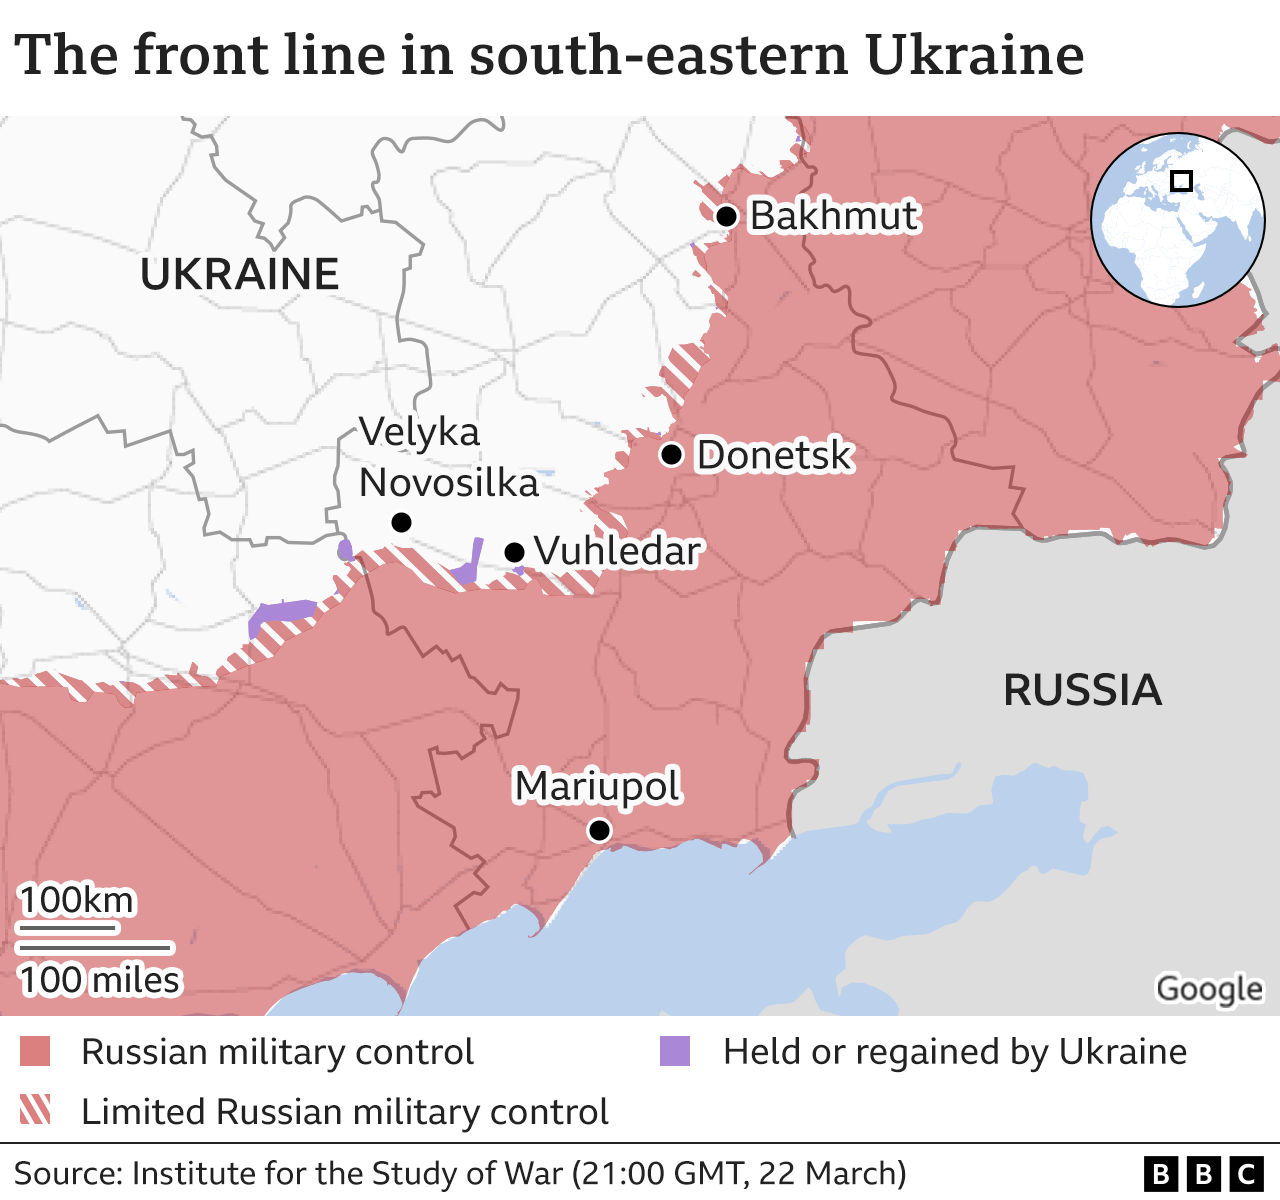 Map of the front line in south-eastern Ukraine - showing areas in Russian military control, and several places including Donetsk and Mariupol..